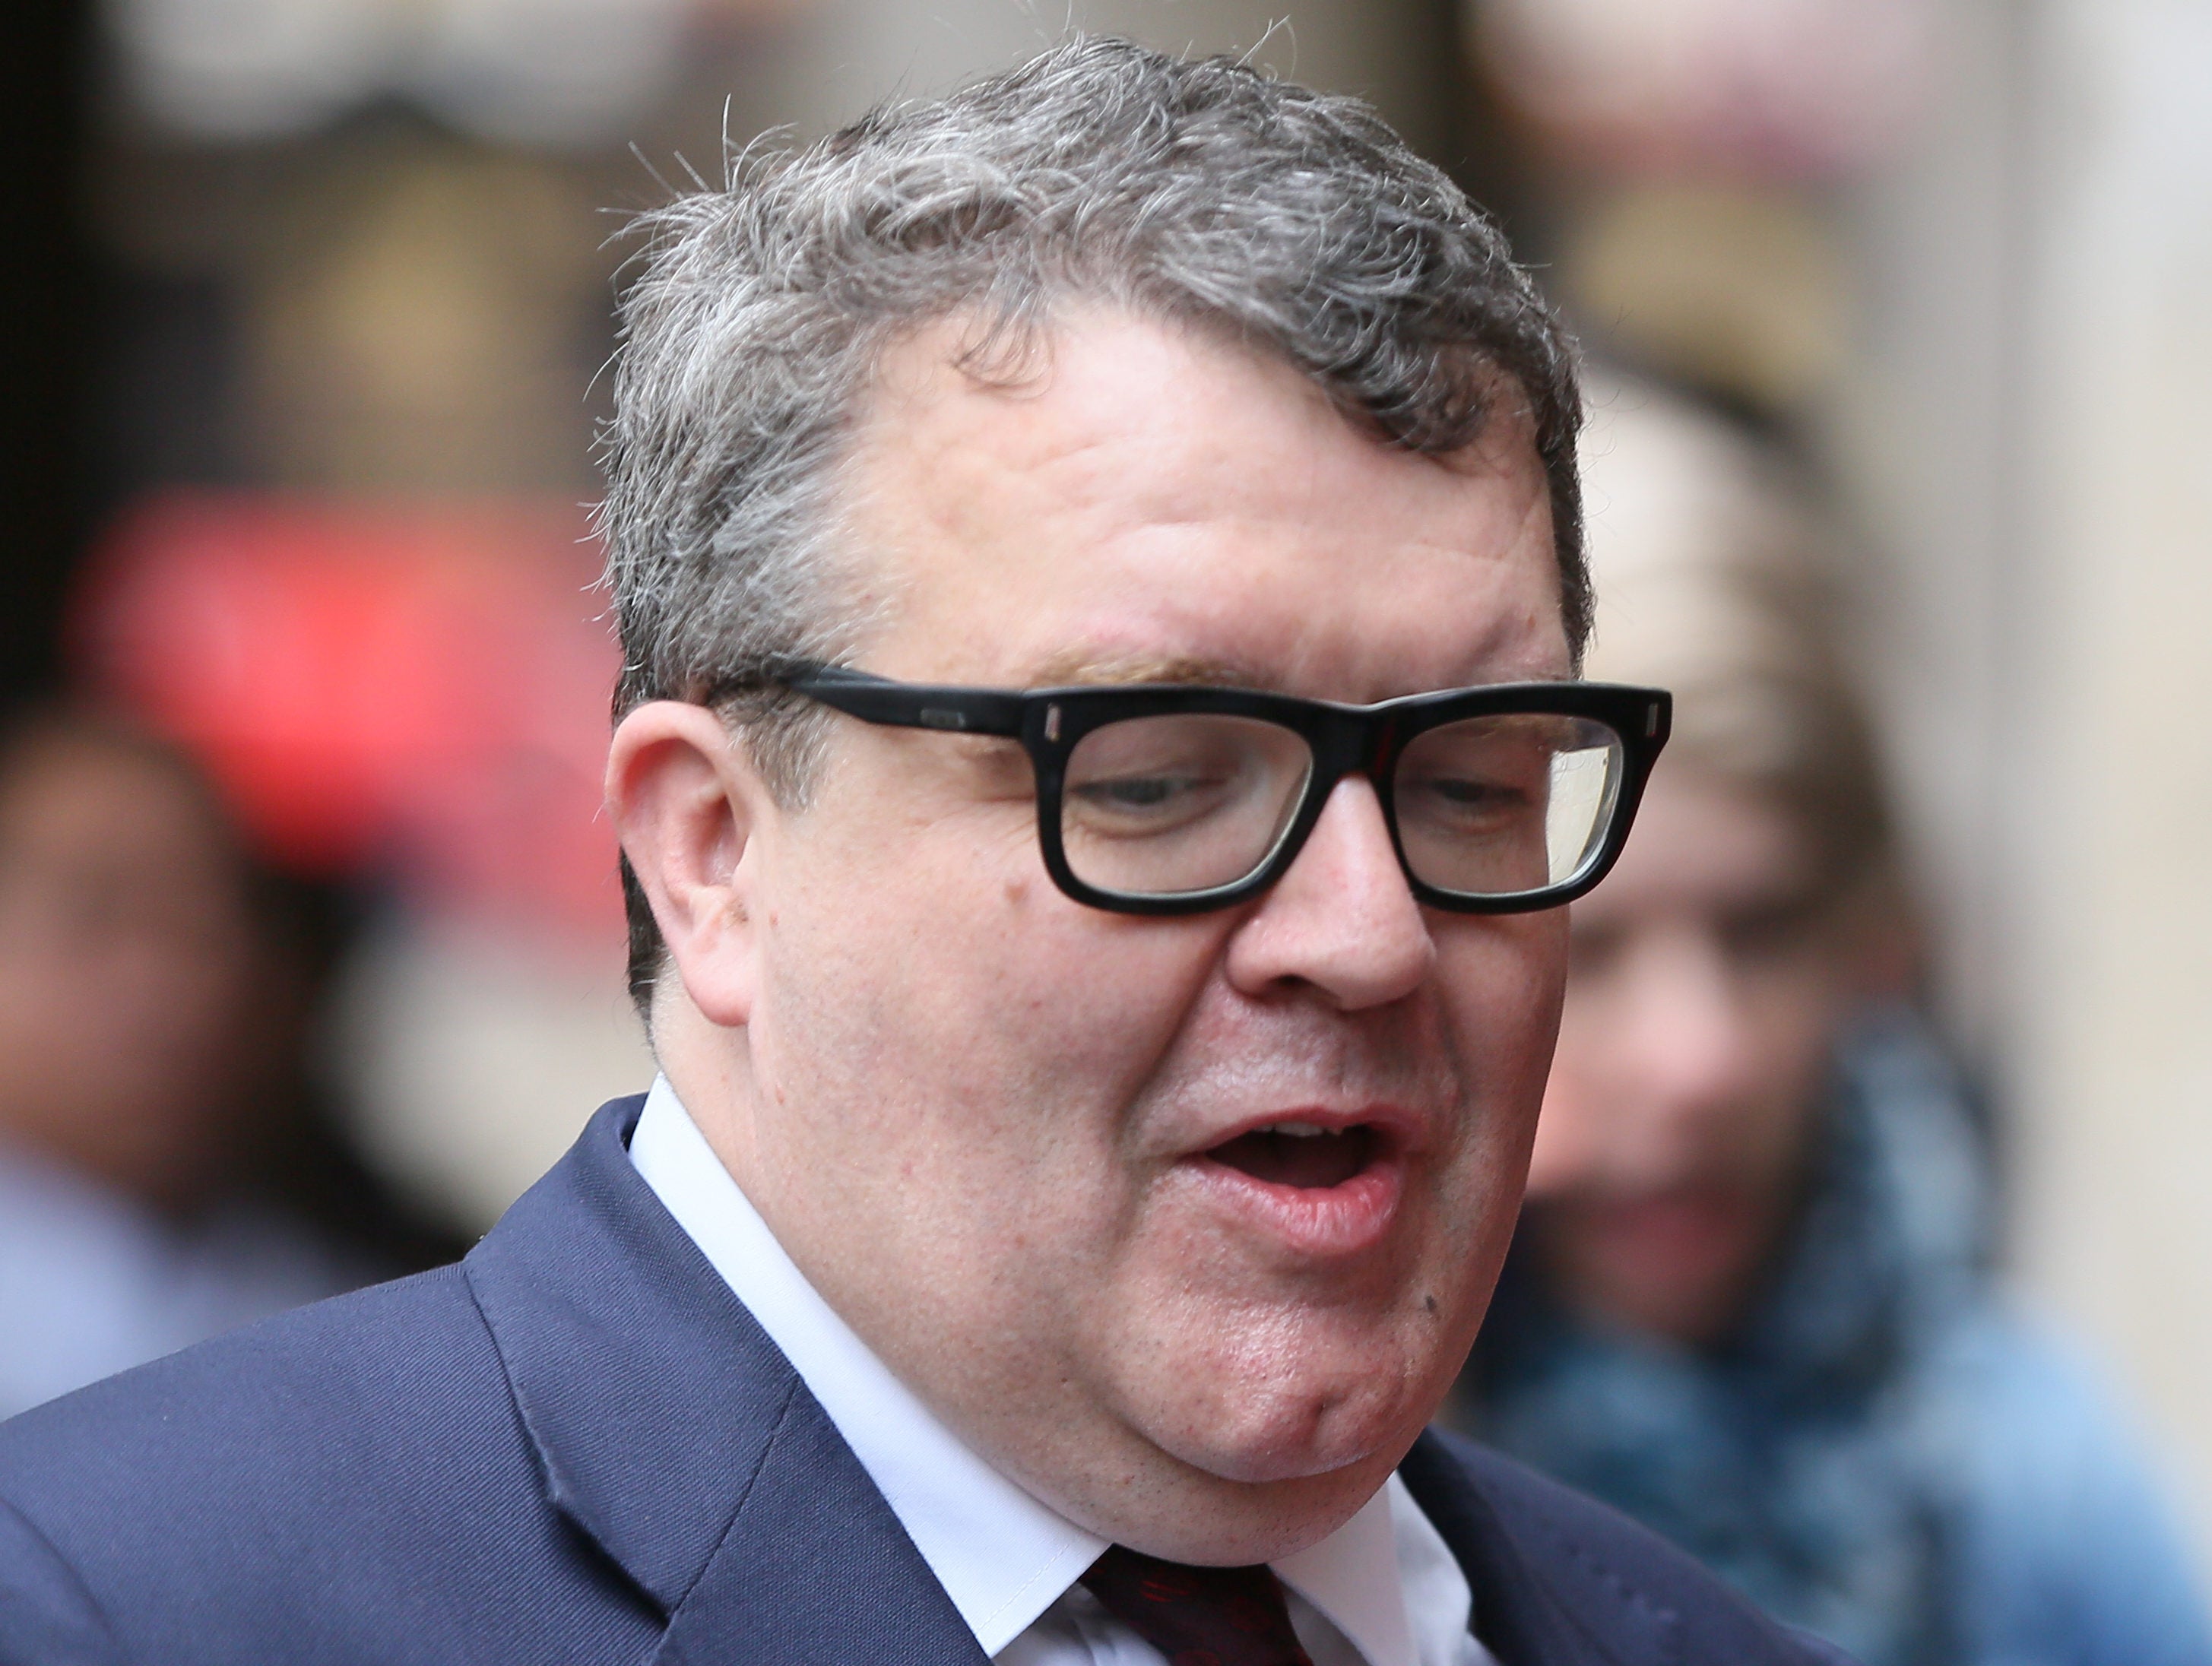 Labour's Tom Watson given £500,000 by press reform campaigner Max Mosley